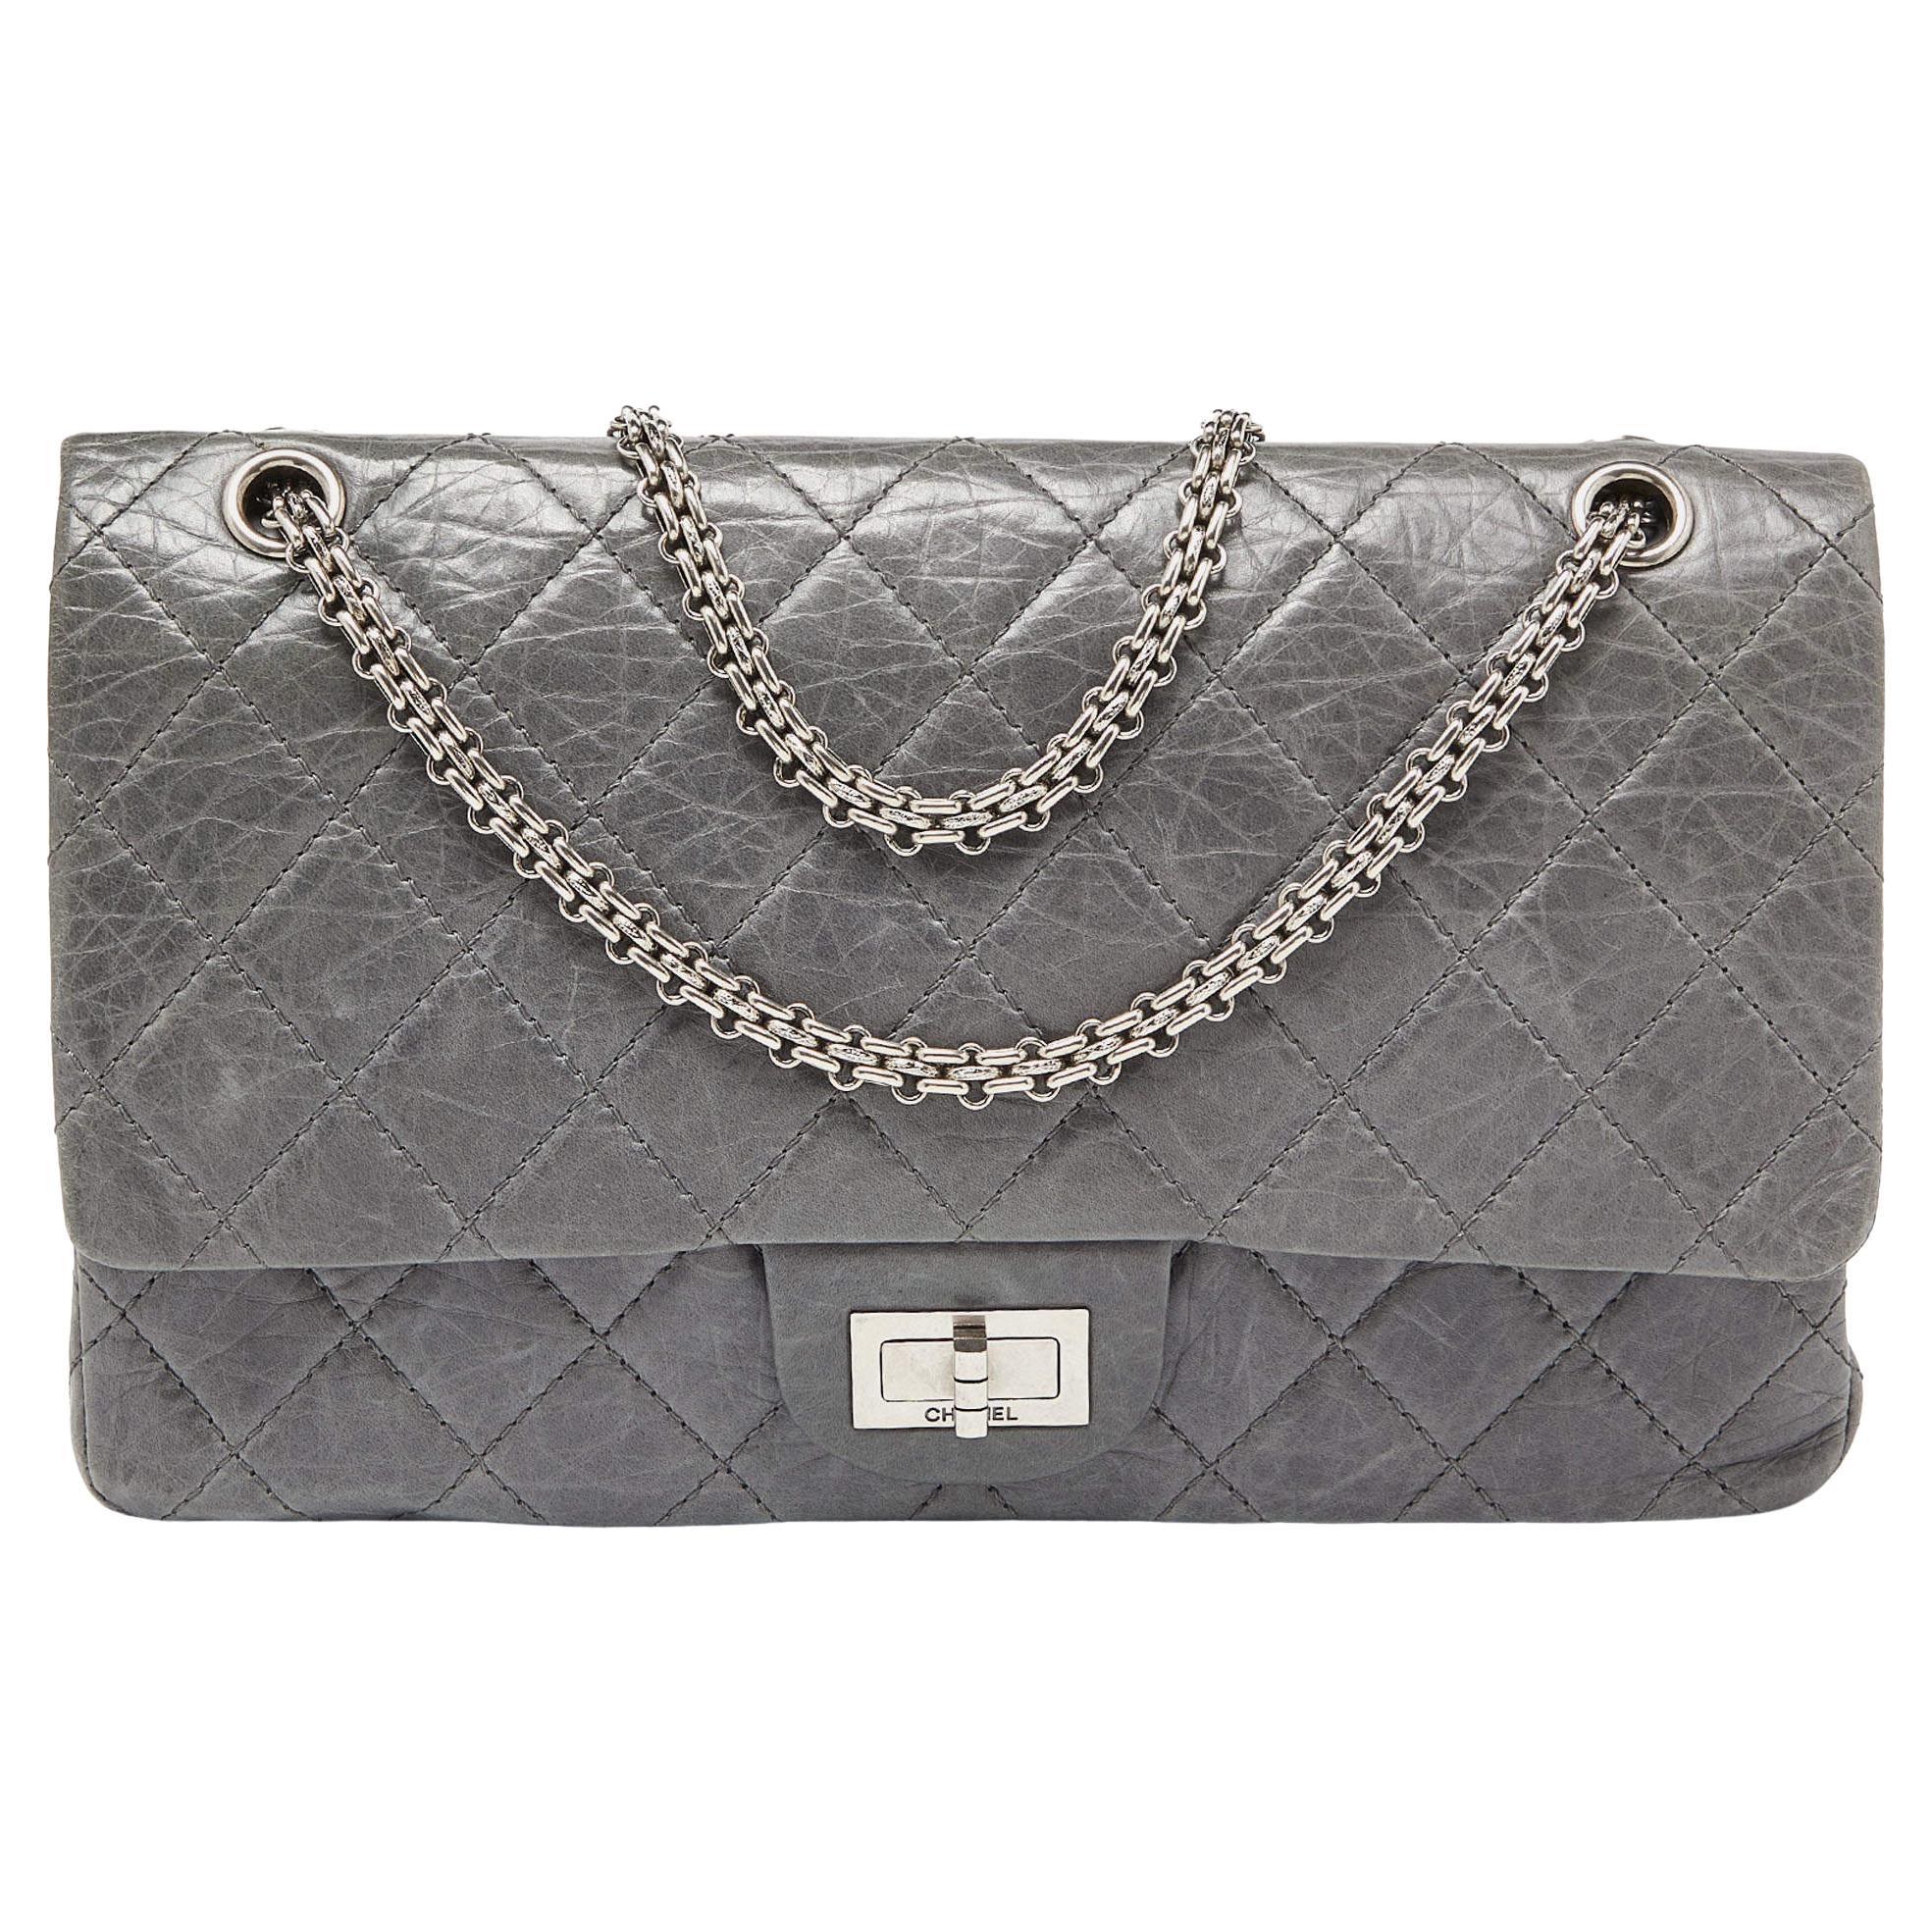 Chanel Grey Quilted Crinkled Leather Limited Edition 50th Anniversary Reissue 2.